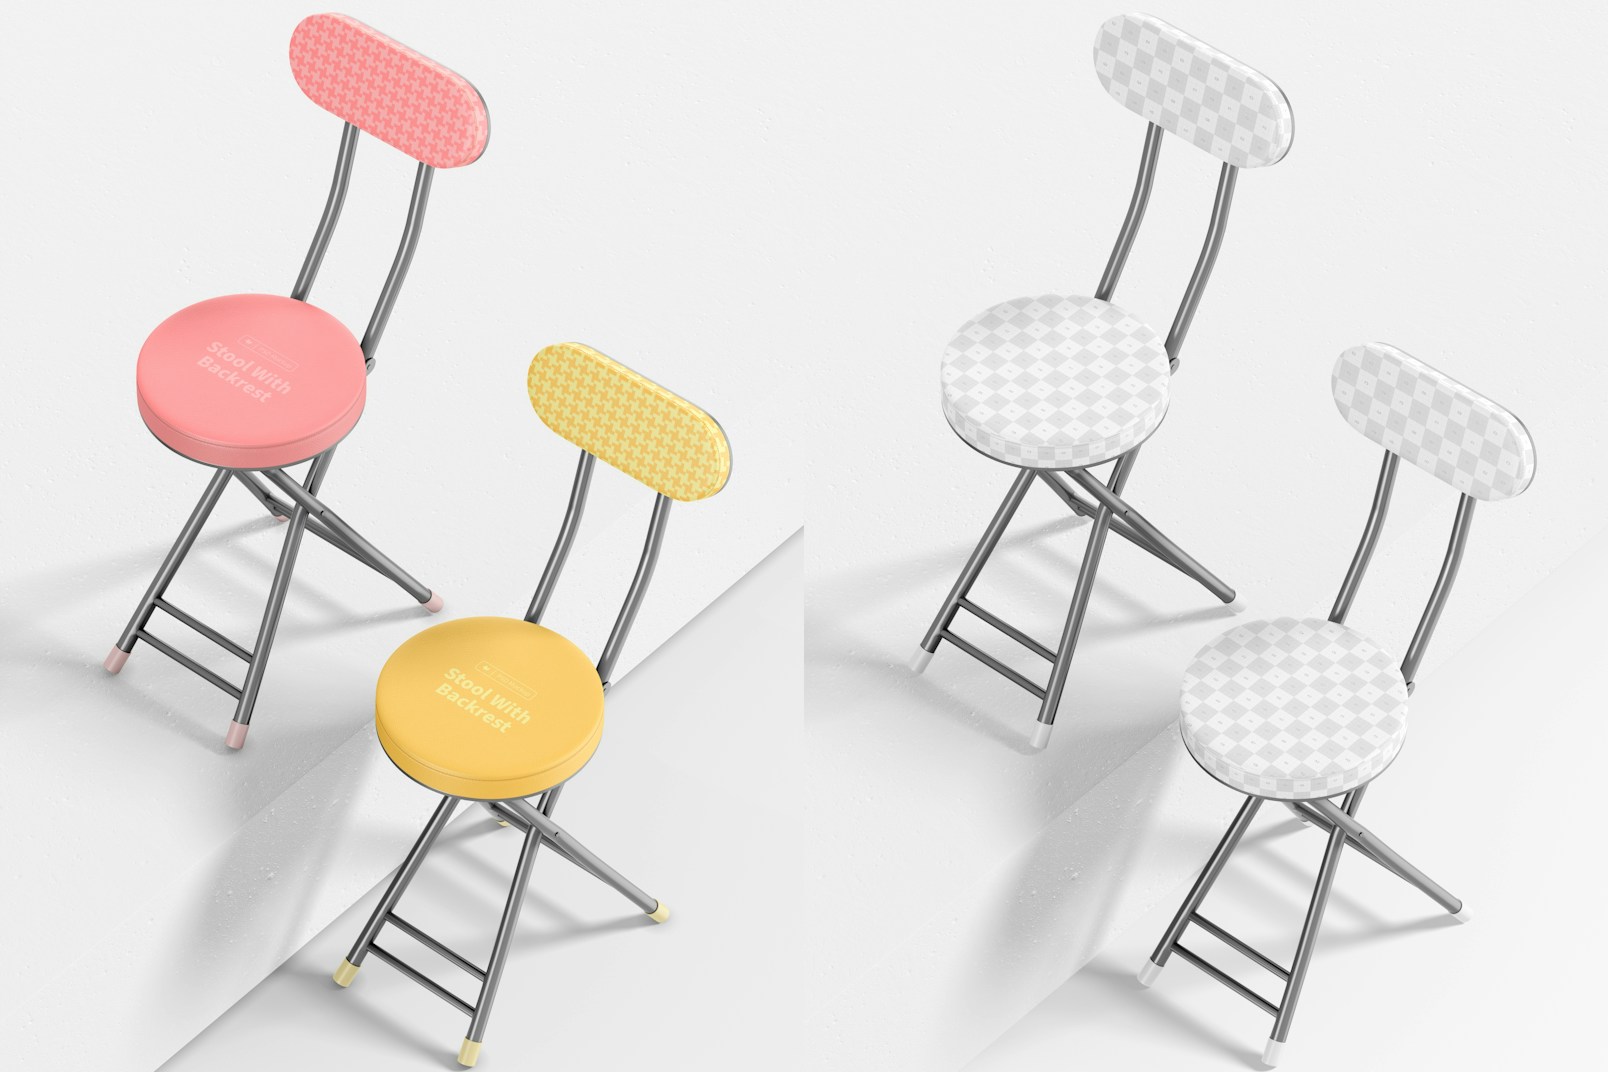 Stools with Backrest Mockup, Perspective